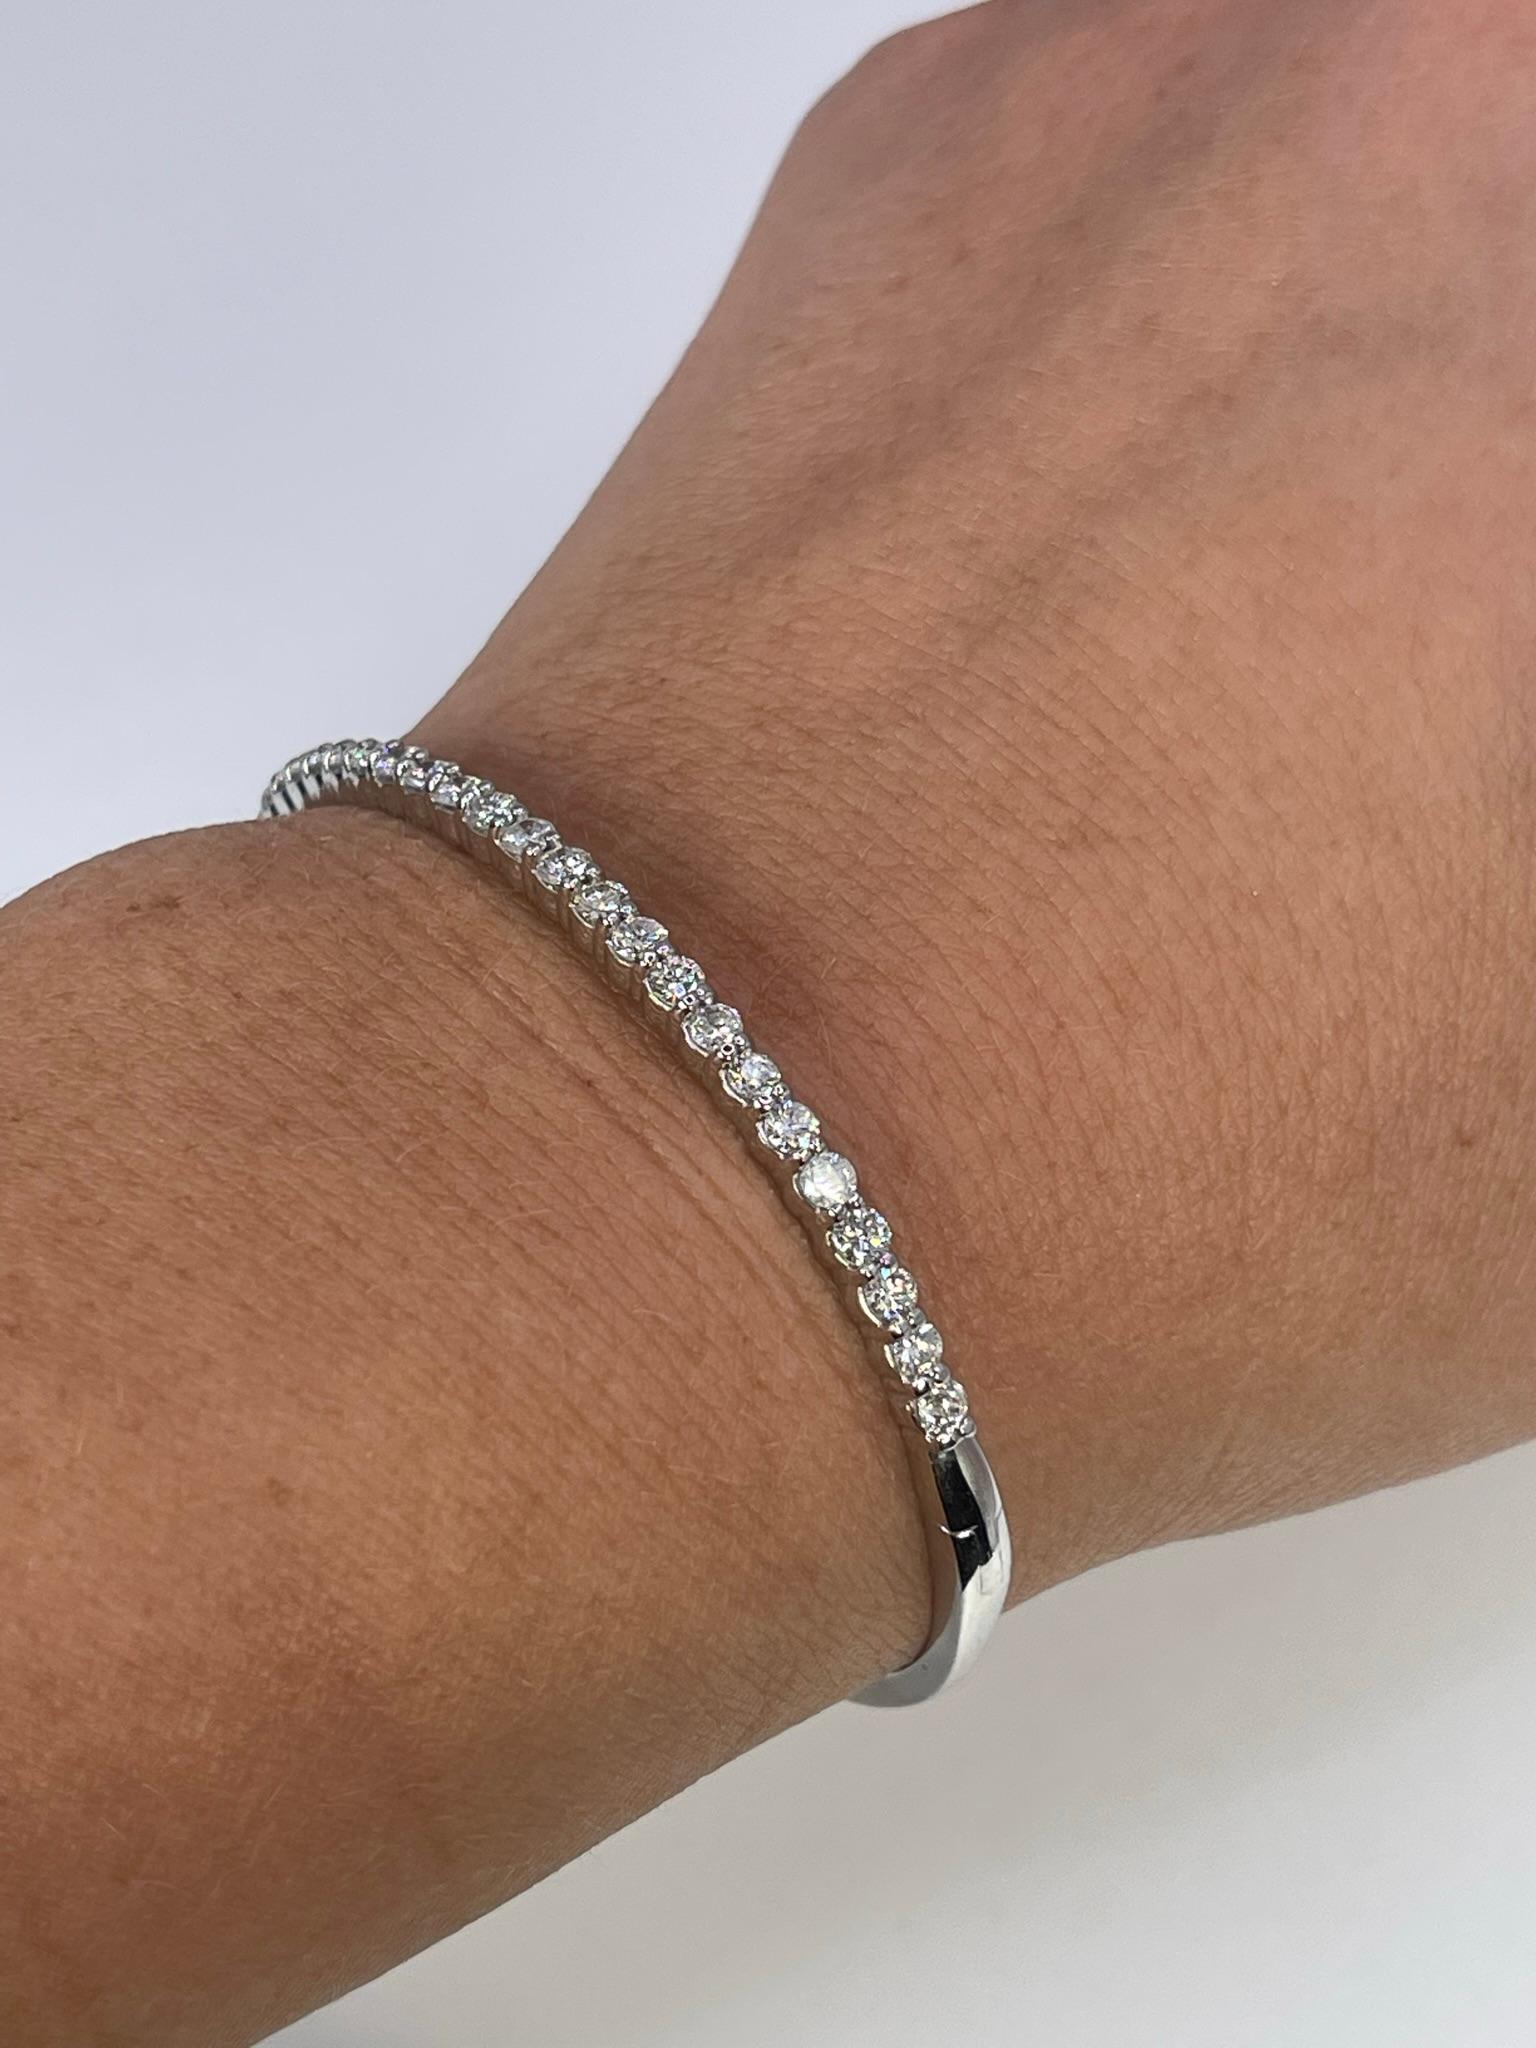 Diamond Bangle bracelet in 14KT white gold, very well crafted with a luxurious touch of perfection.

GRAM WEIGHT: 14.50gr
METAL: 14KT white gold

NATURAL DIAMOND(S)
Cut: Round 
Color: G (average)
Clarity: VS-SI (average)
Carat: 0.70ct
Length: 2.3